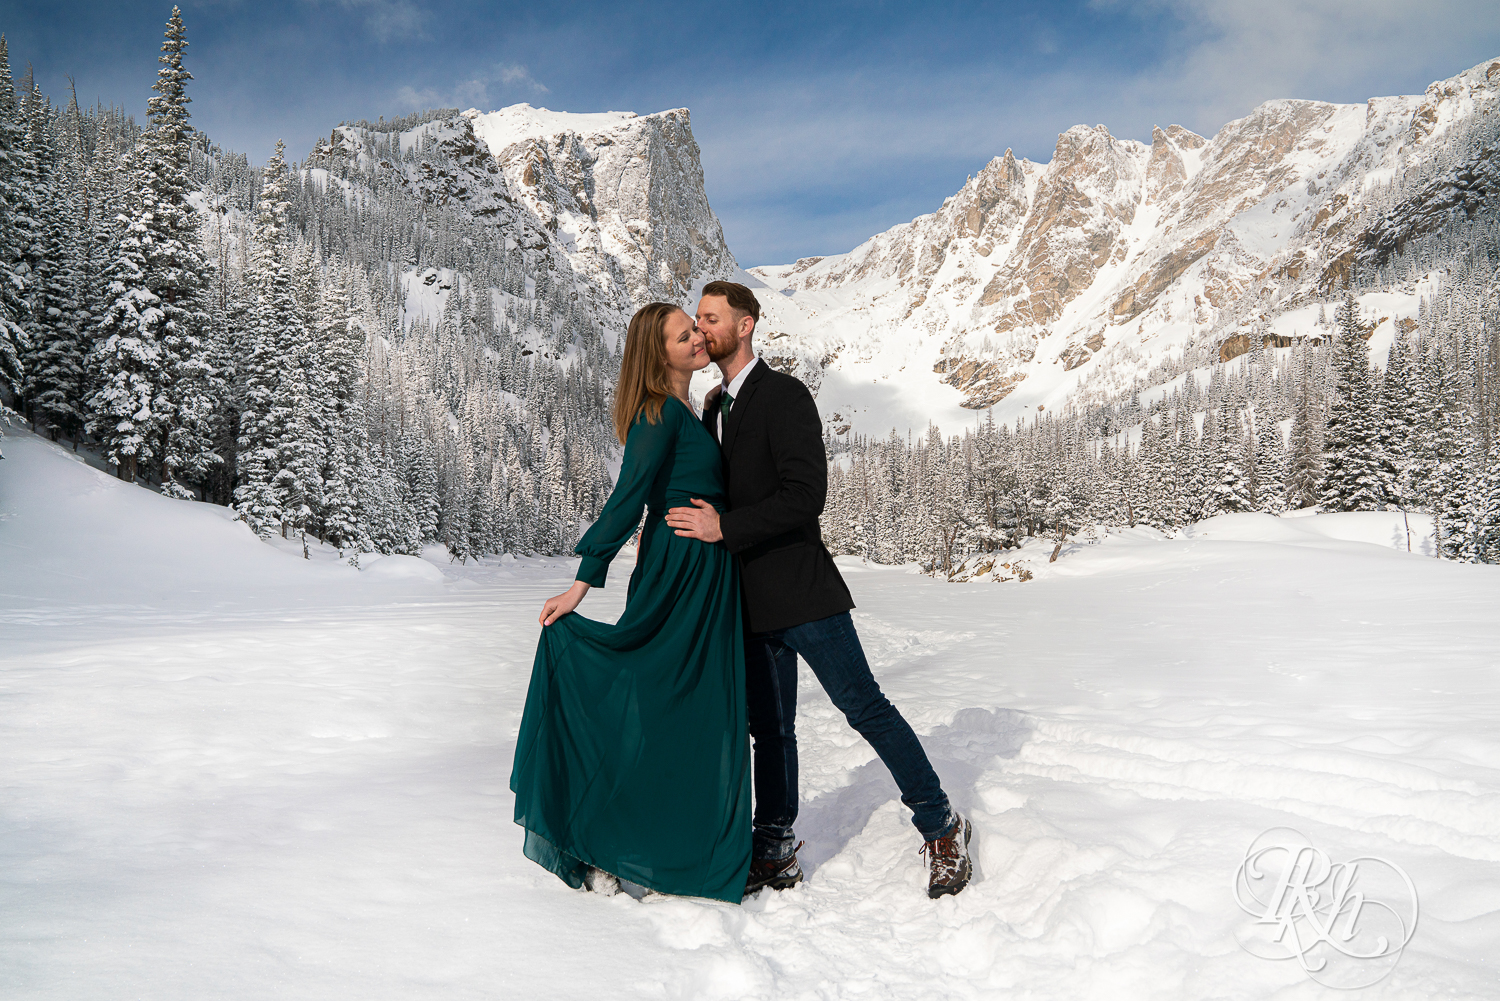 Man in suit and woman in green dress kiss in snow on Dream Lake in Rocky Mountain National Park, Colorado.